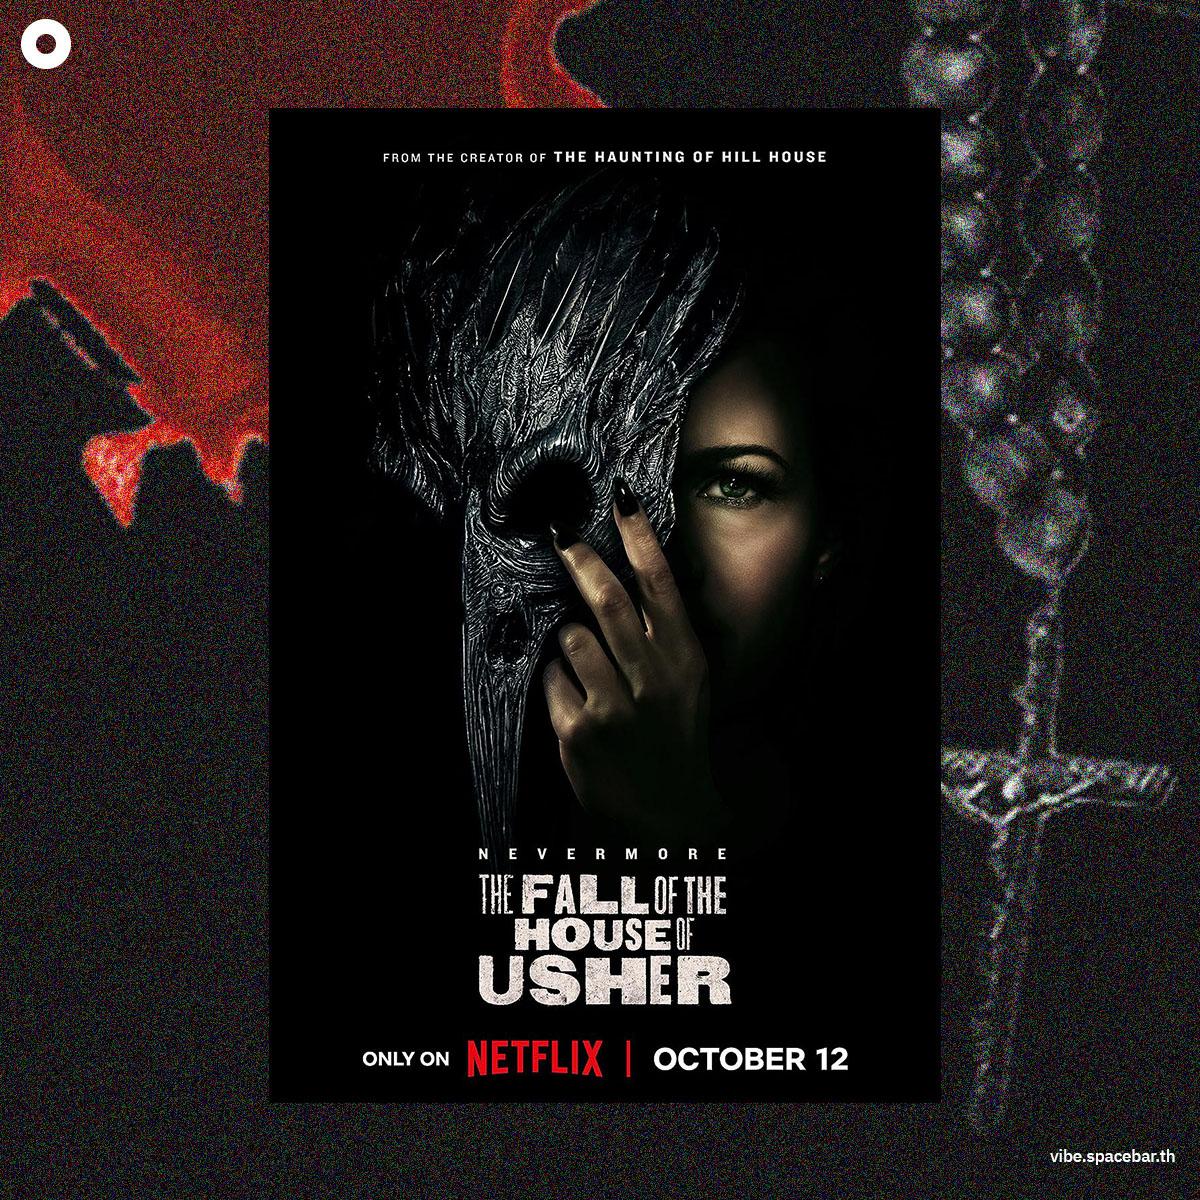 5-New-Movie-And-Series-From-Netflix-For-Halloween-SPACEBAR-Photo03.jpg